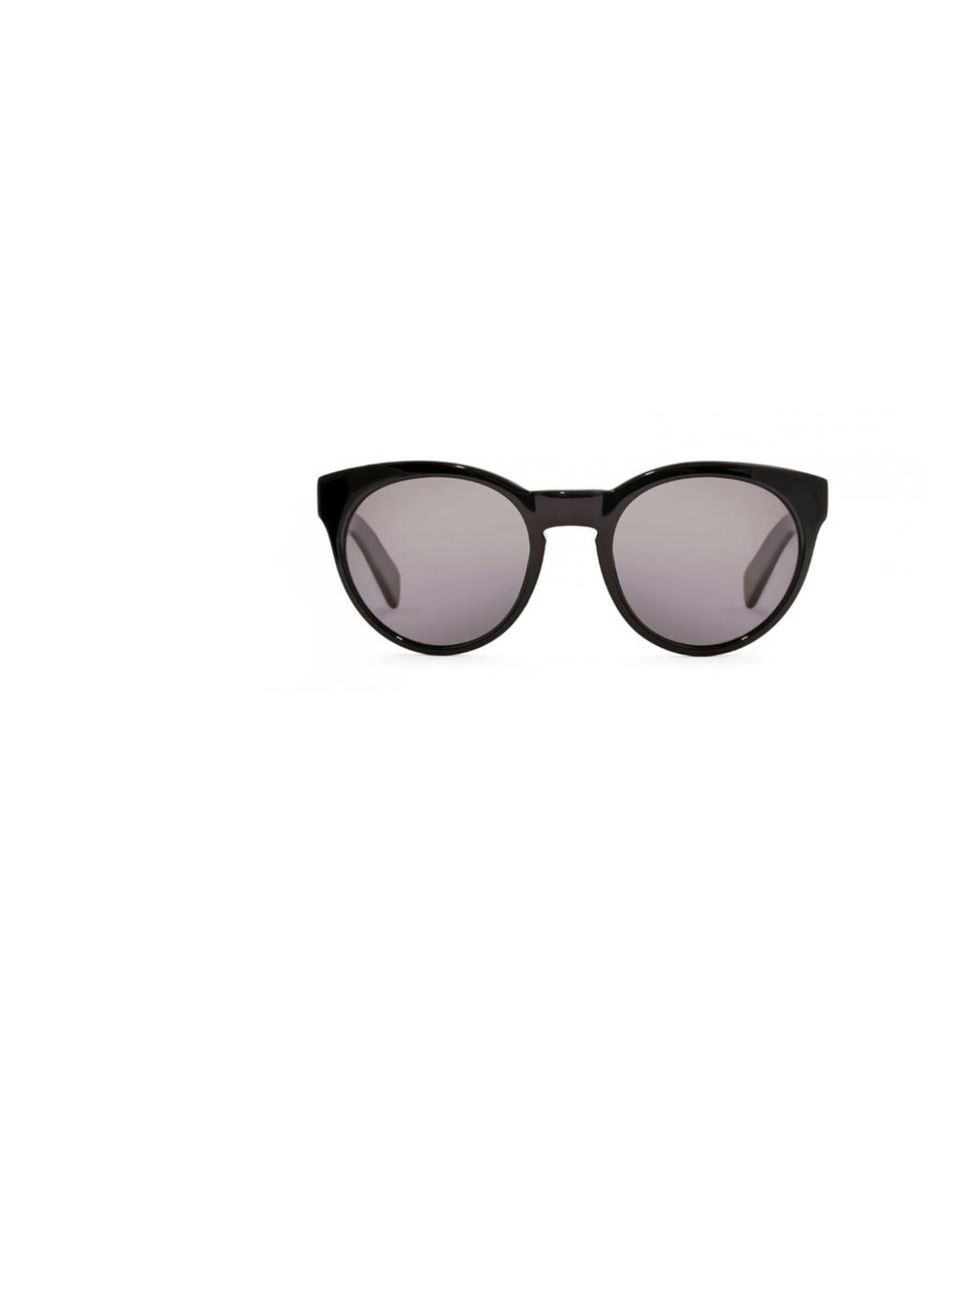 <p>Oliver Peoples 'Olivia' sunglasses, £211, at Adam Simmonds, for stockists call 0207 813 1234</p>